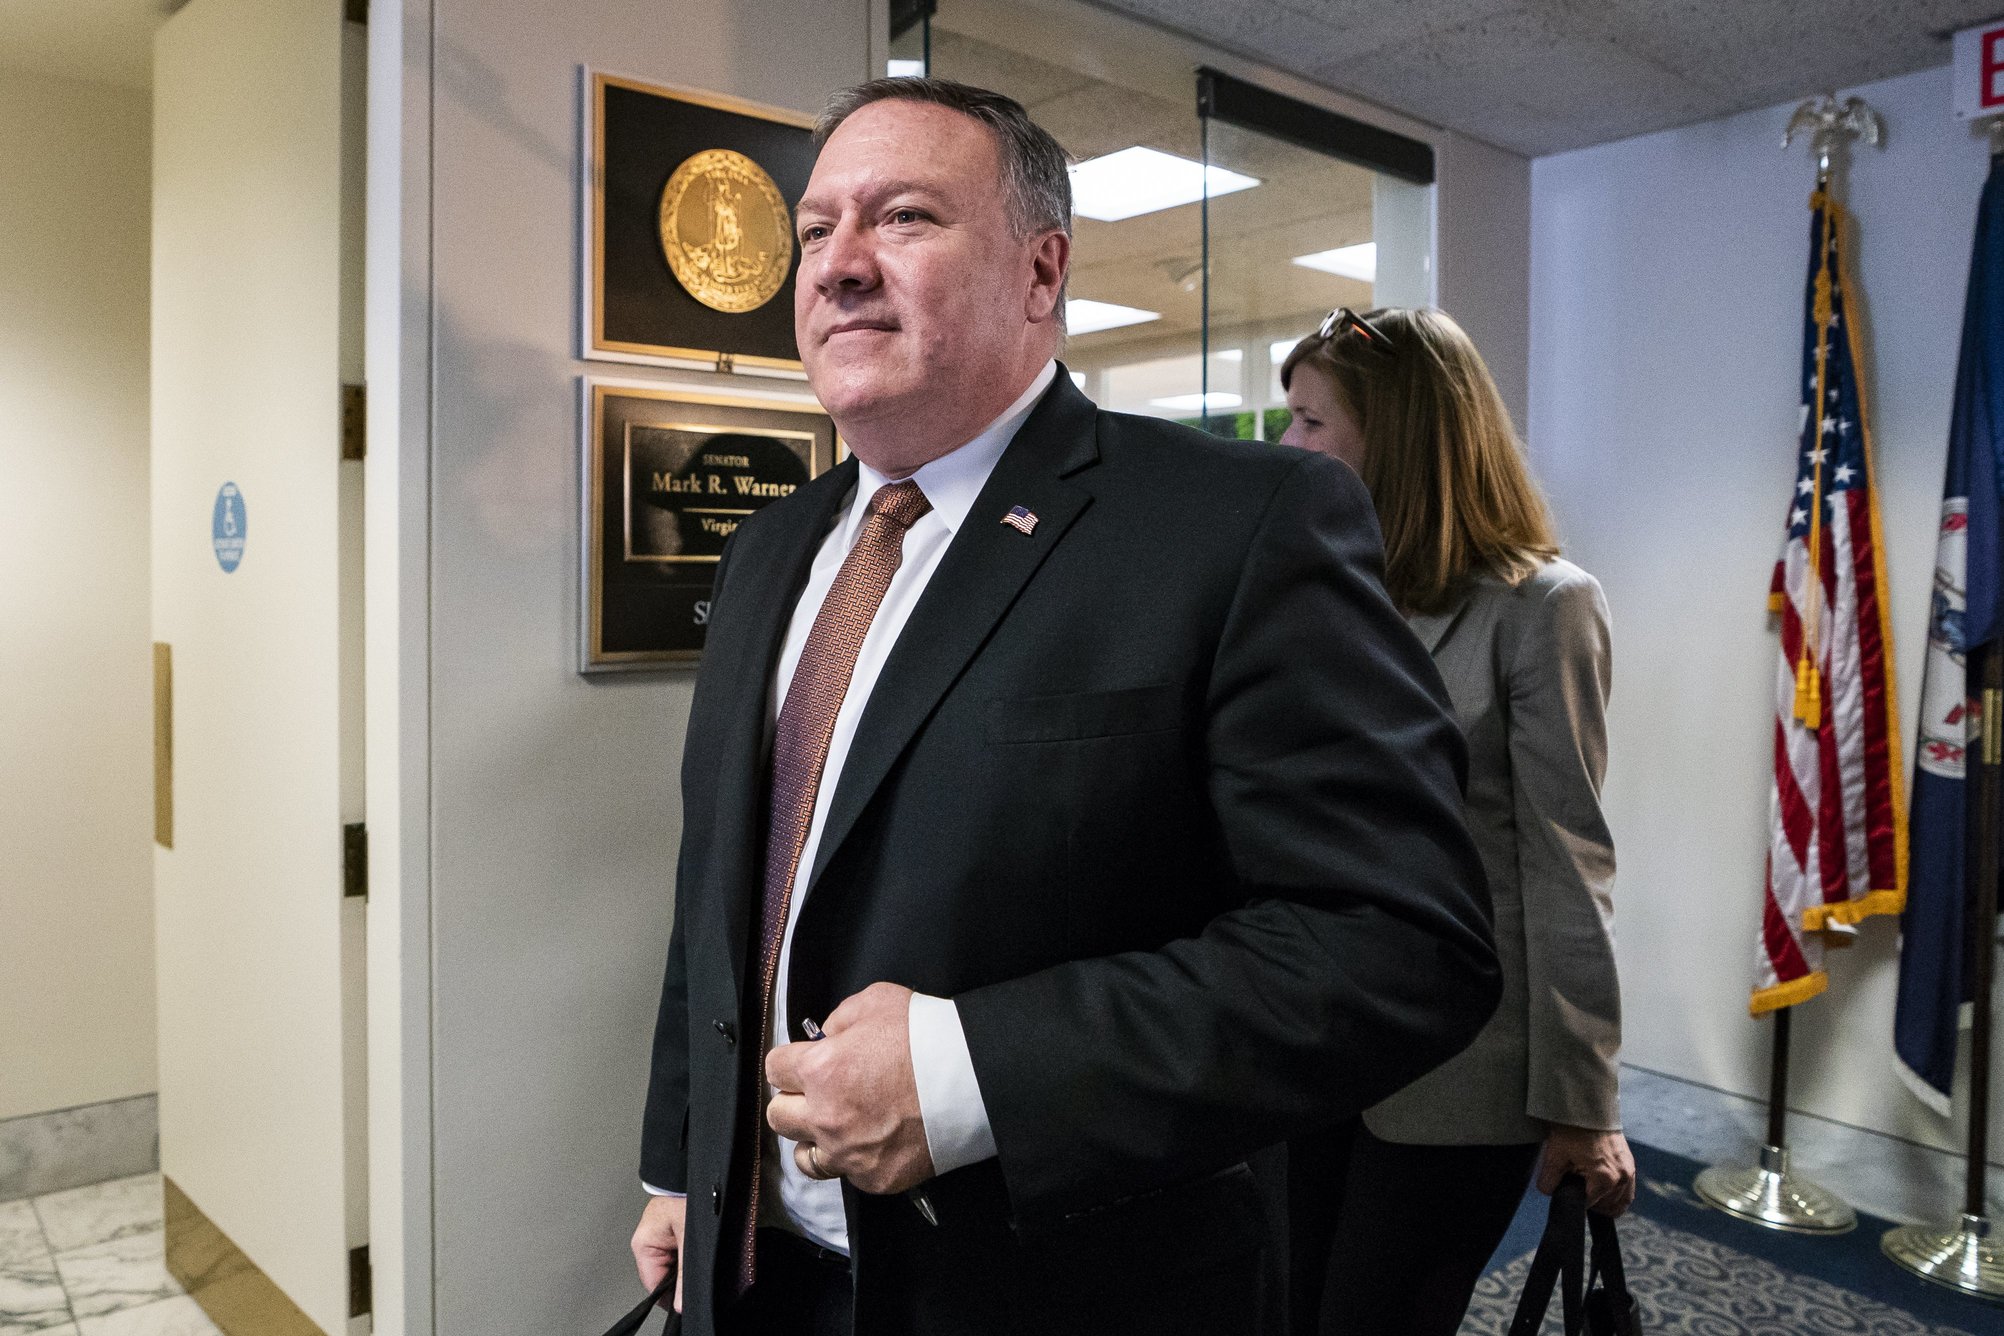 epa06677788 CIA Director Mike Pompeo leaves a meeting with Democratic Senator from Virginia Mark Warner (out of frame) in the Hart Senate Office Building in Washington DC, USA, 18 April 2018. Two weeks ago, Pompeo met secretly with North Korean leader Kim Jong Un in North Korea.  EPA/JIM LO SCALZO